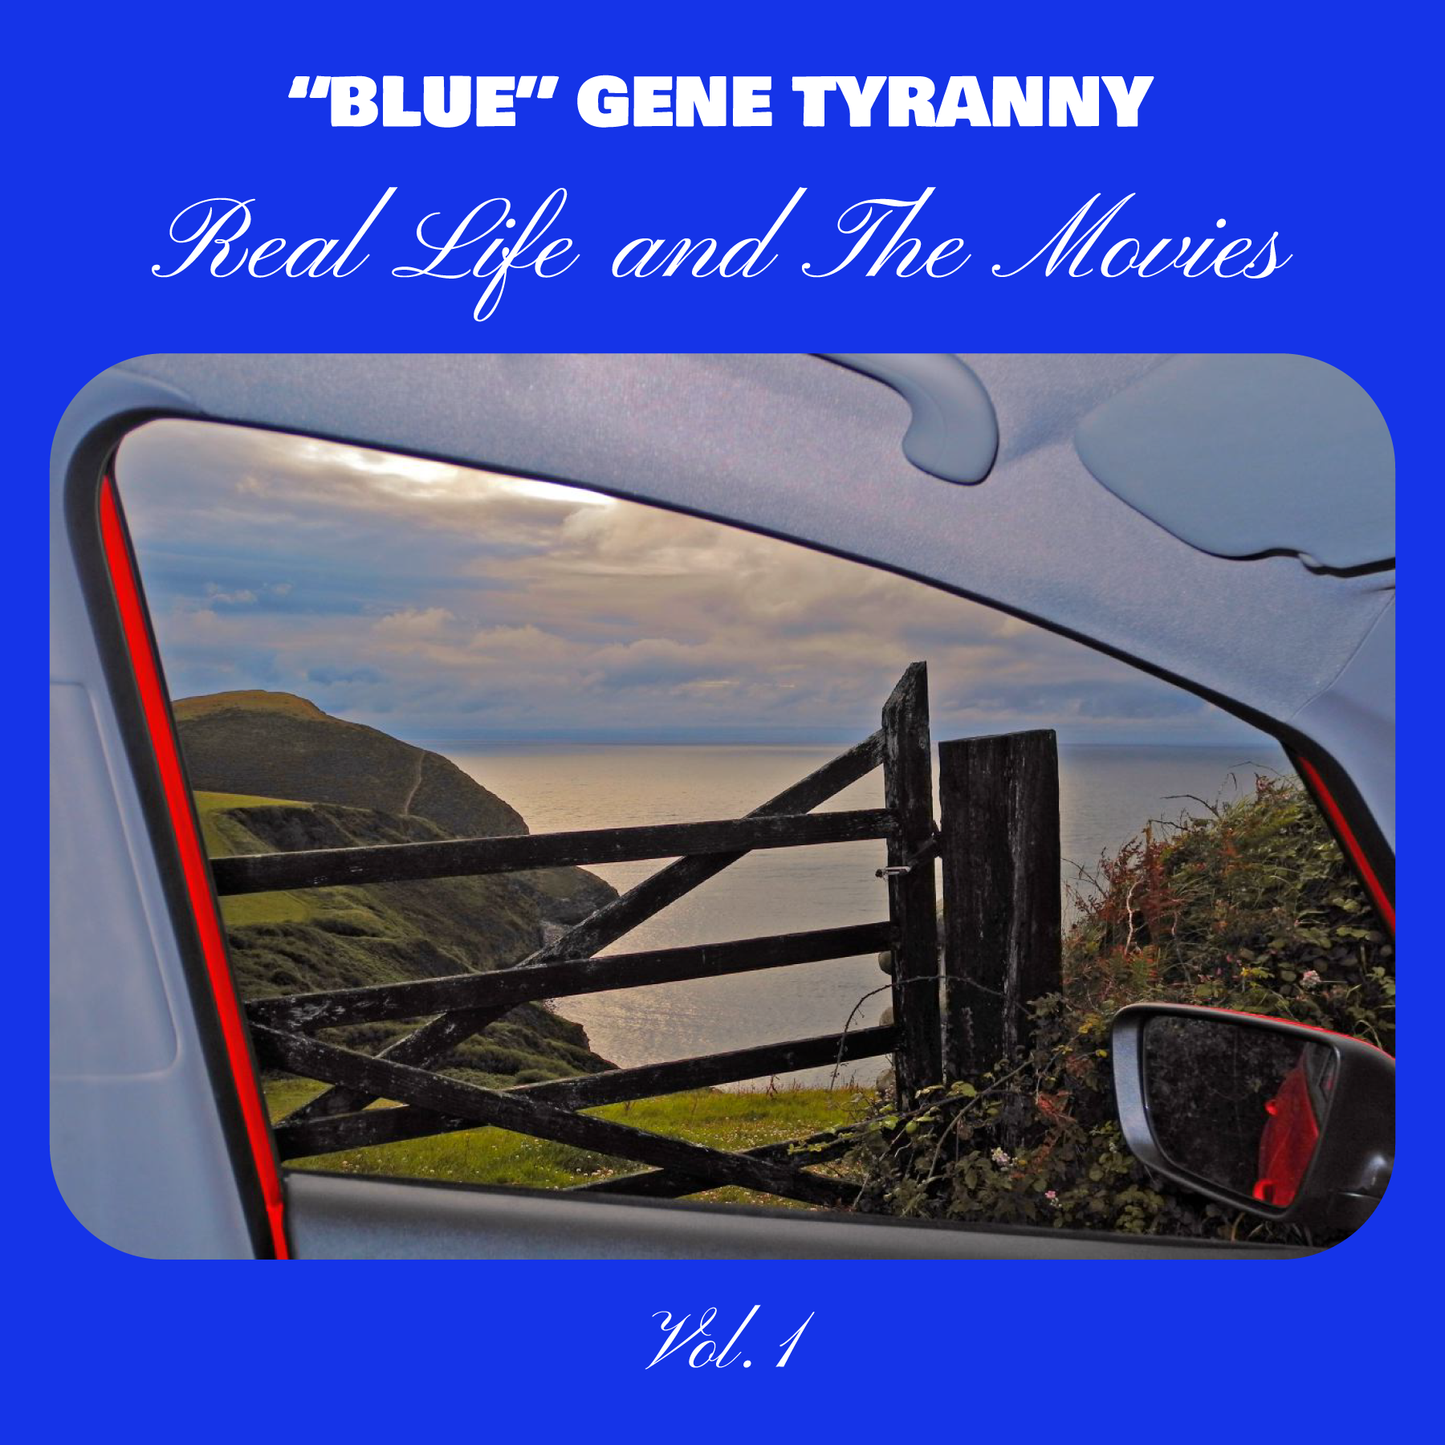 "Blue" Gene Tyranny - Real Life and The Movies